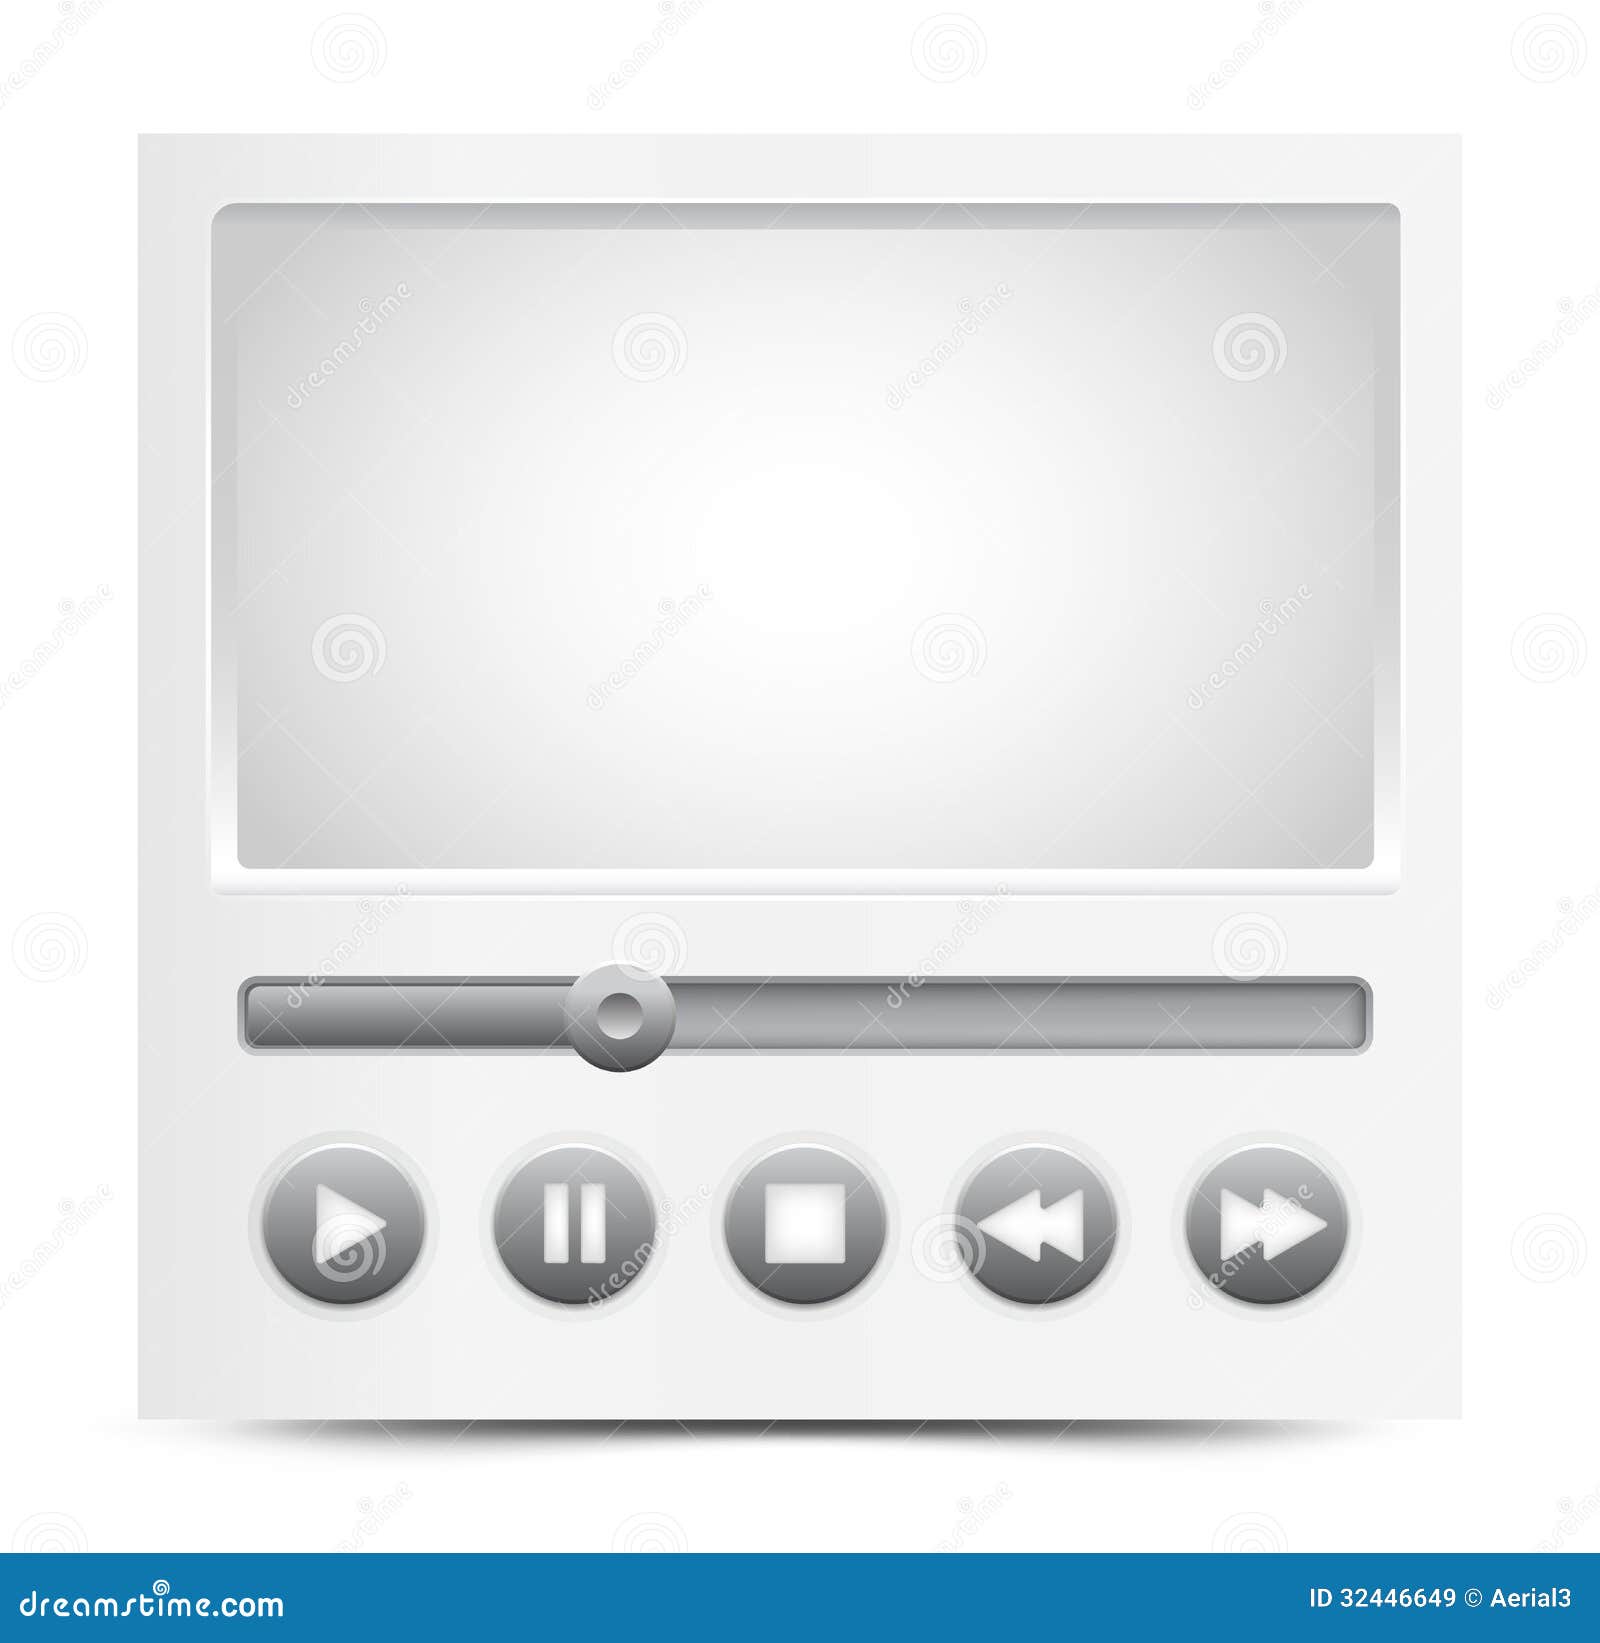 video player clipart - photo #26